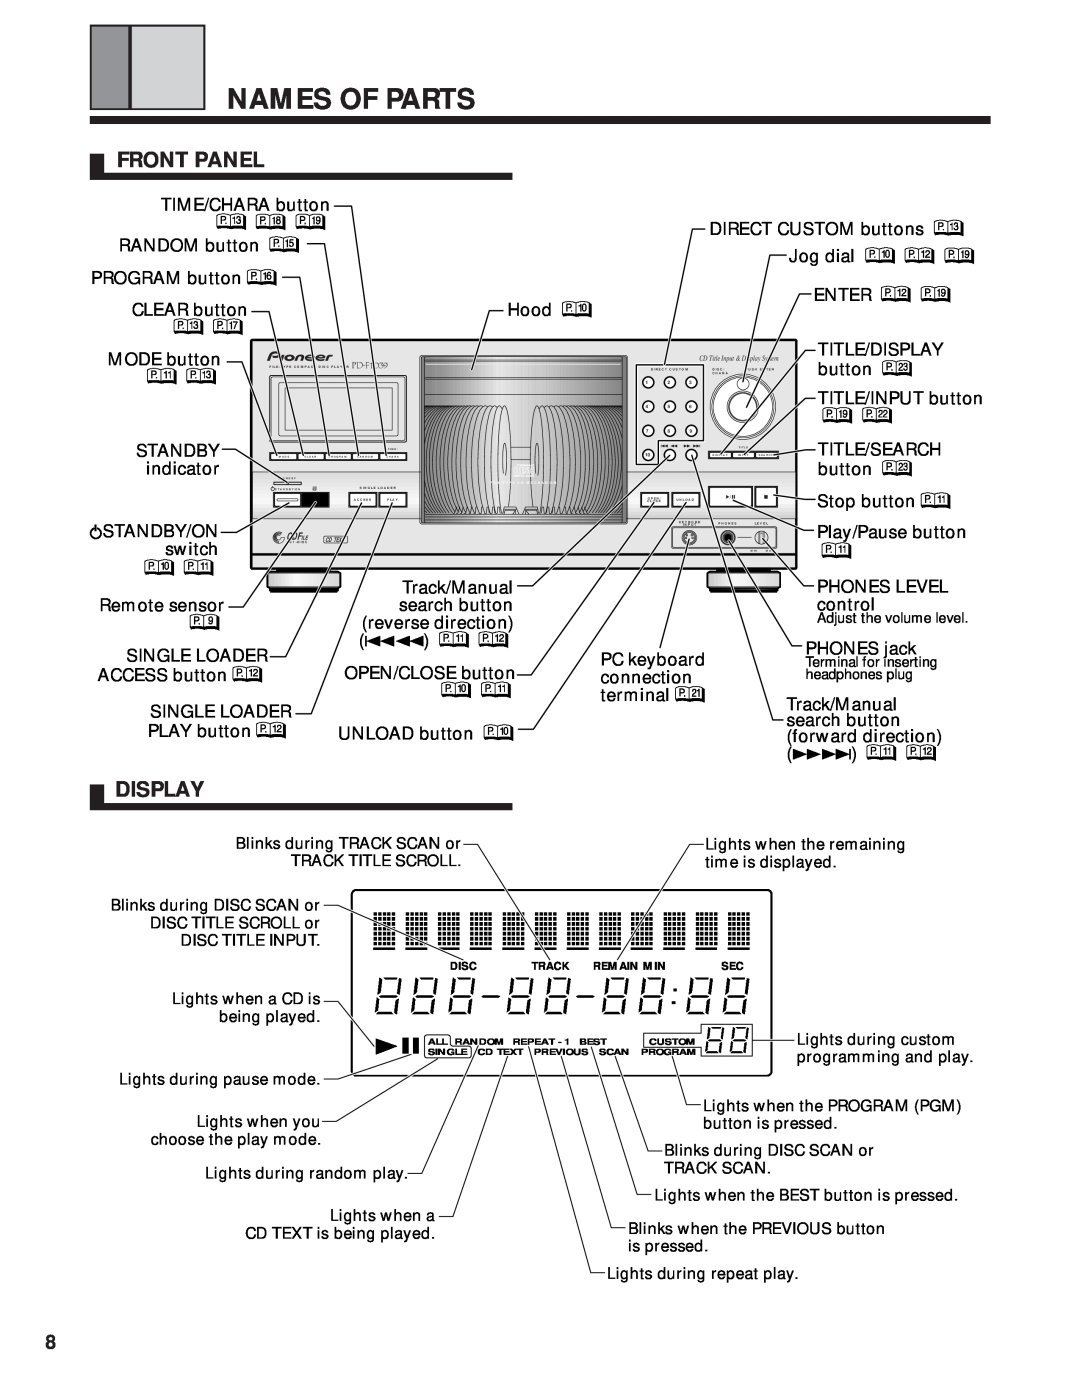 Pioneer PD-F1039 manual Names Of Parts, Front Panel, Display 